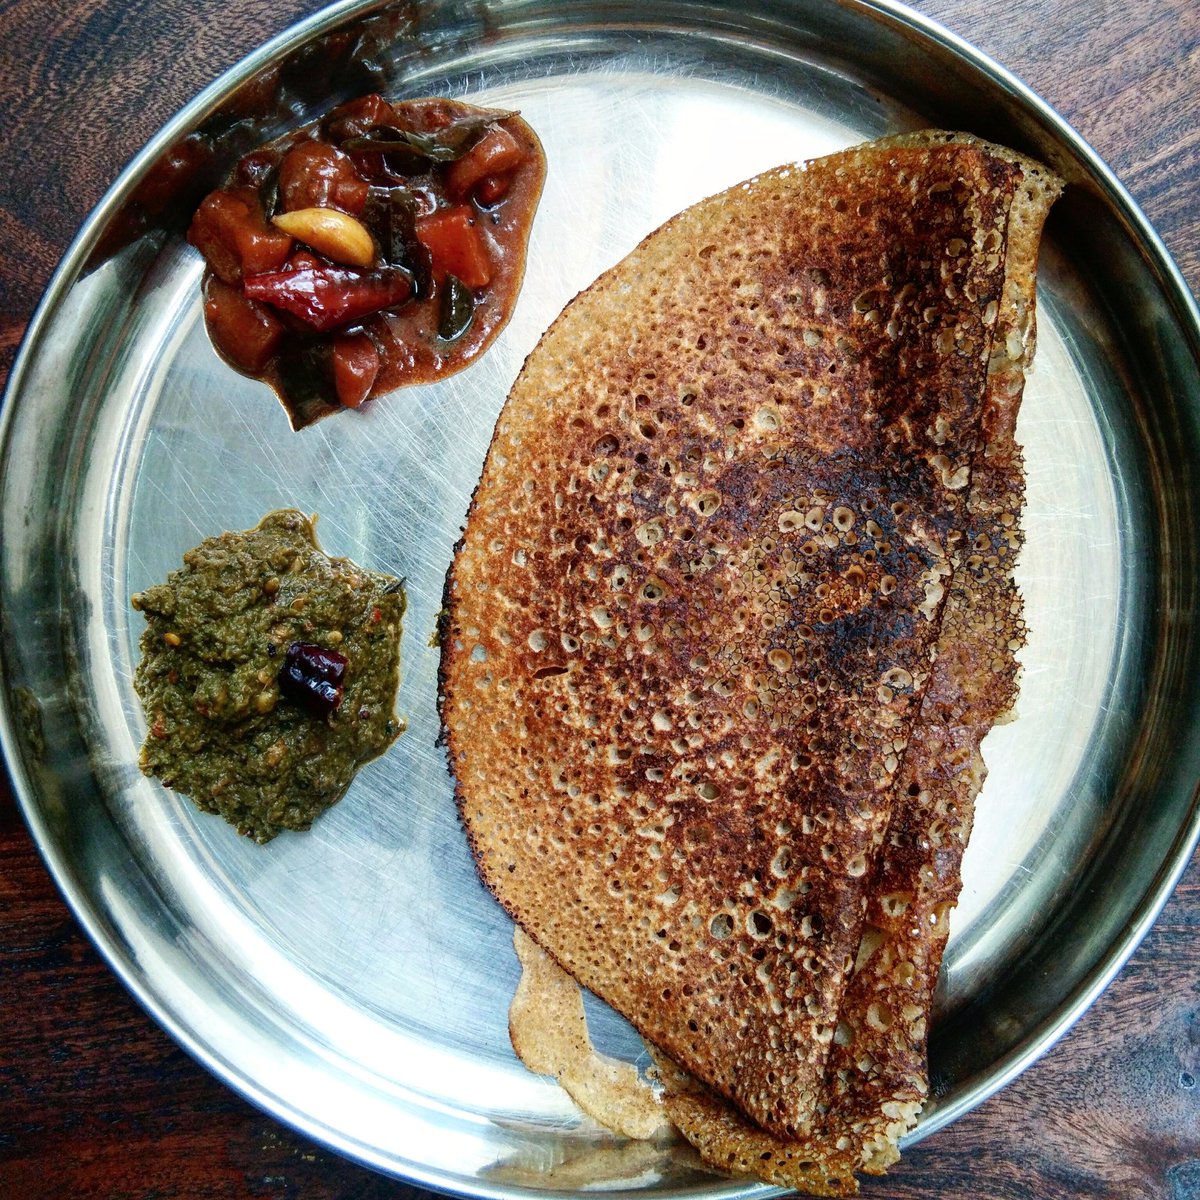 Breakfast is experimental dosai with ~70% (pearl millet + semolina+ oats) flour & rest rice flour. Came out well, thanks to Nandu's skills.